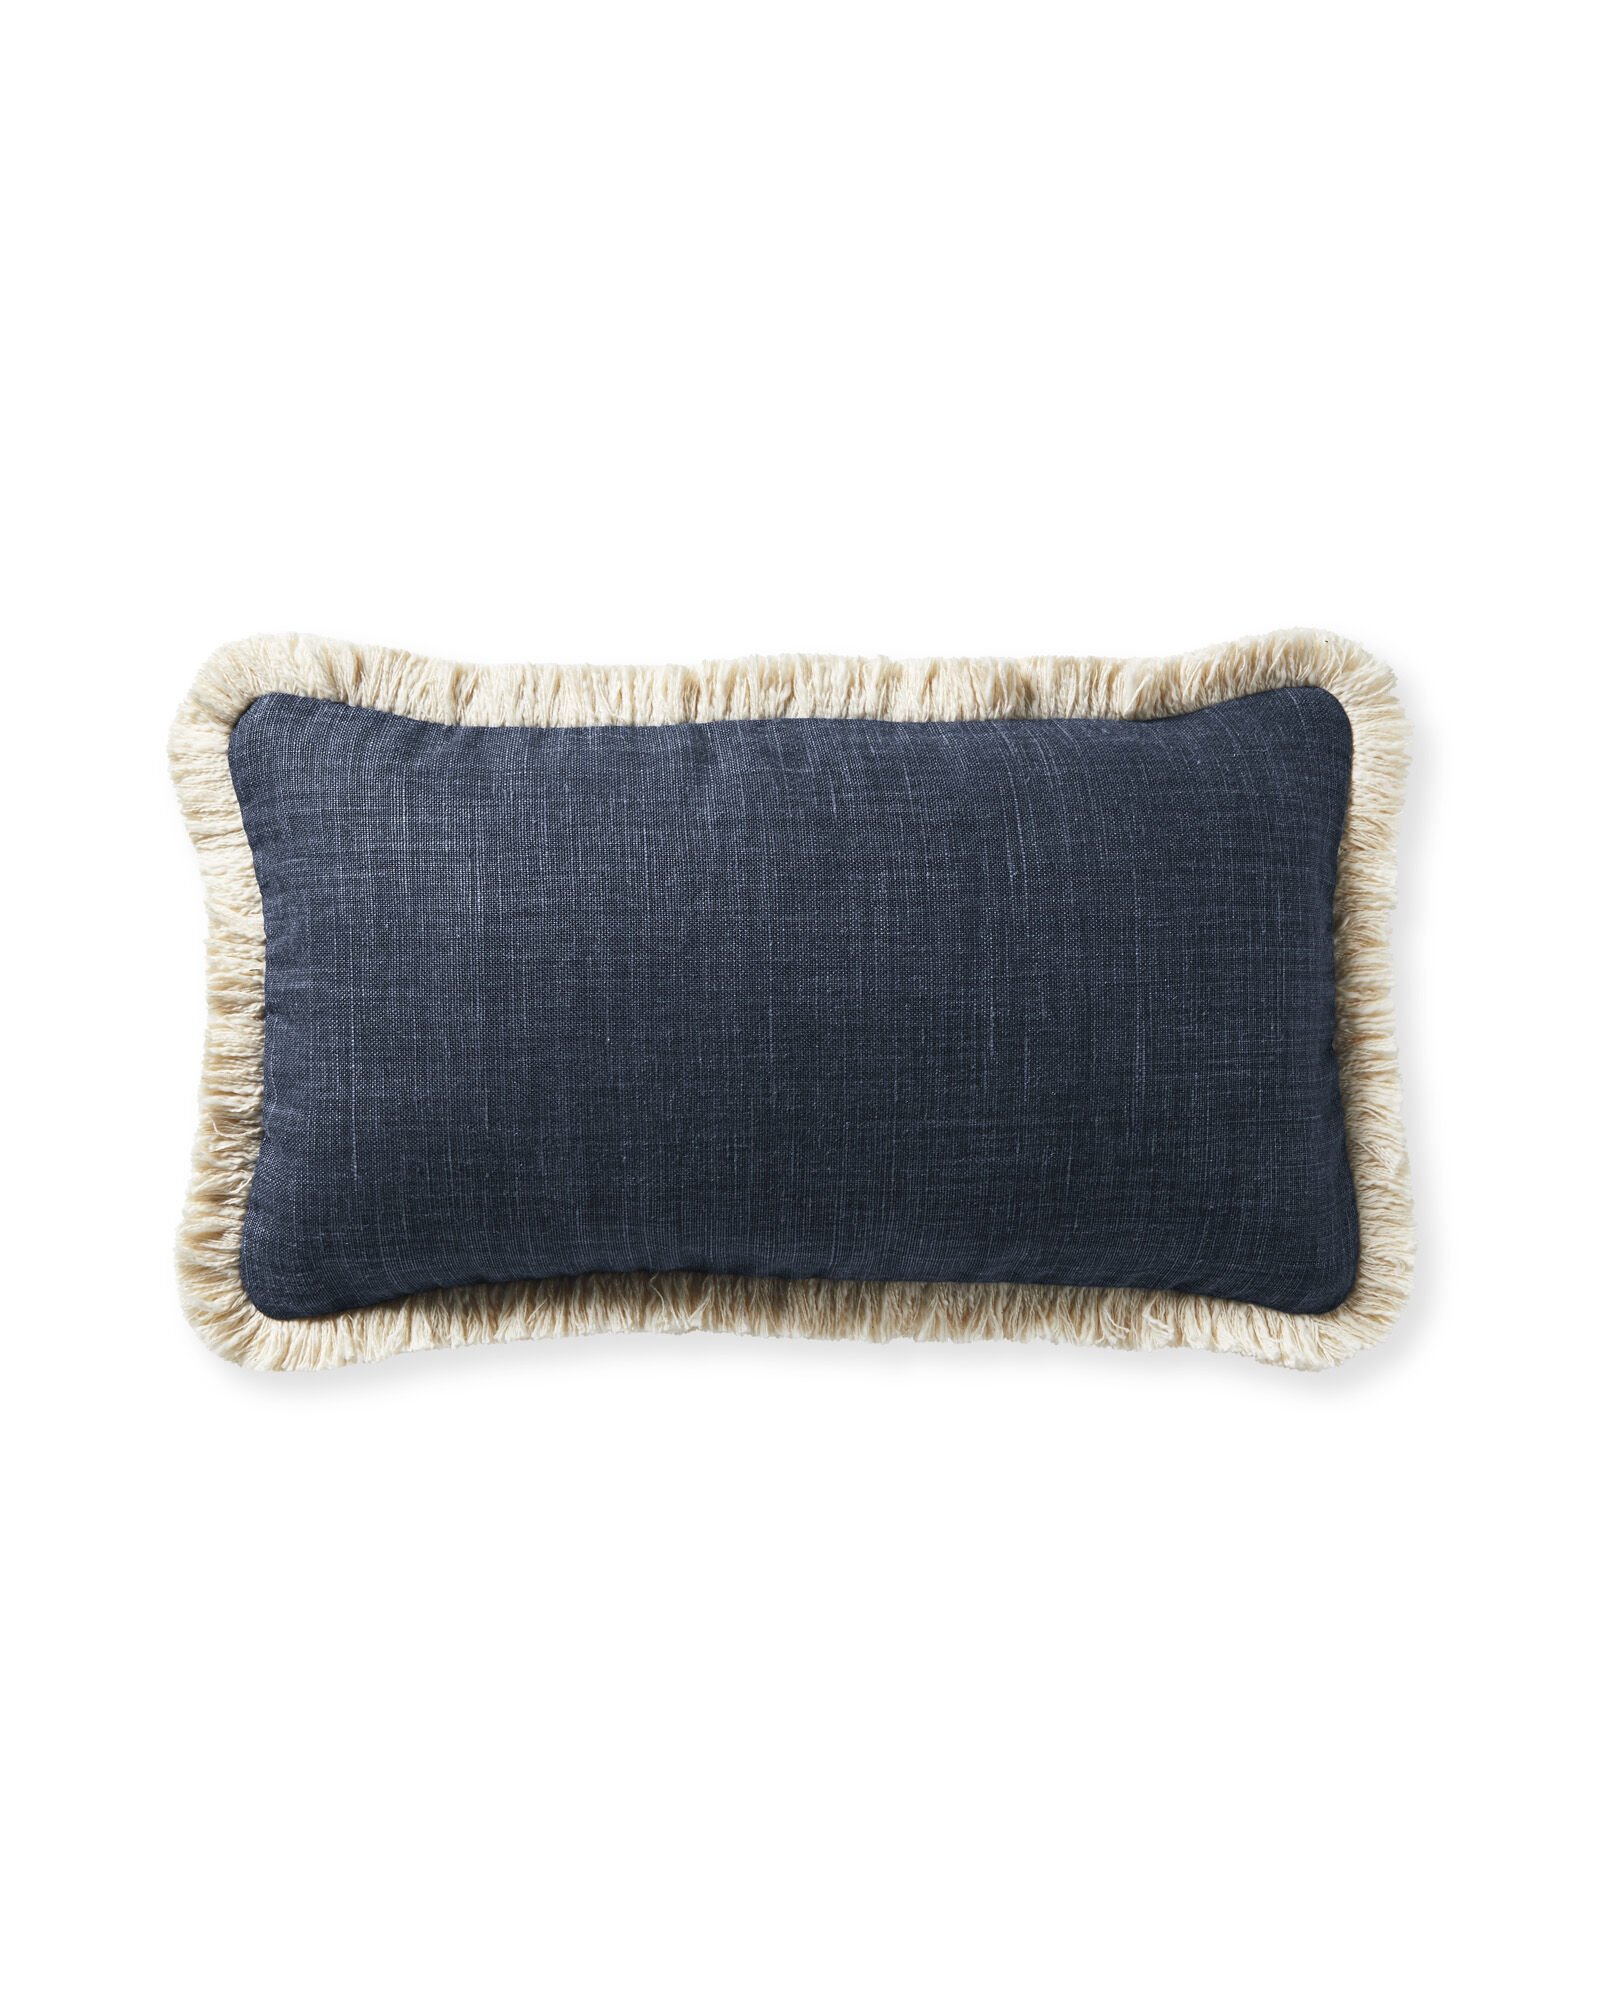 Bowden Pillow Cover - Image 0